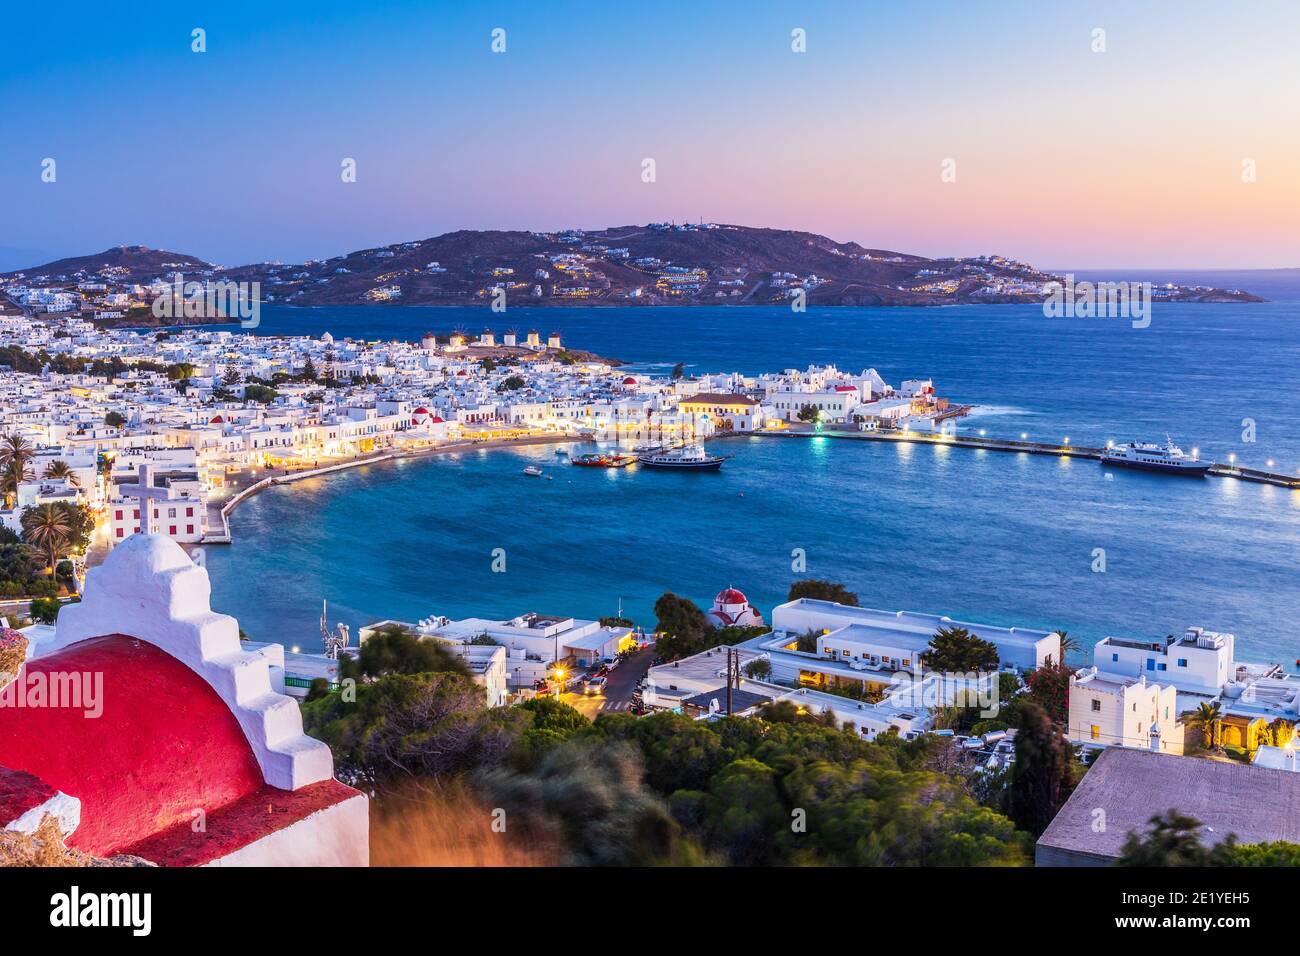 Mykonos, Greece. Panoramic view of Mykonos town, Cyclades islands at sunset. Stock Photo